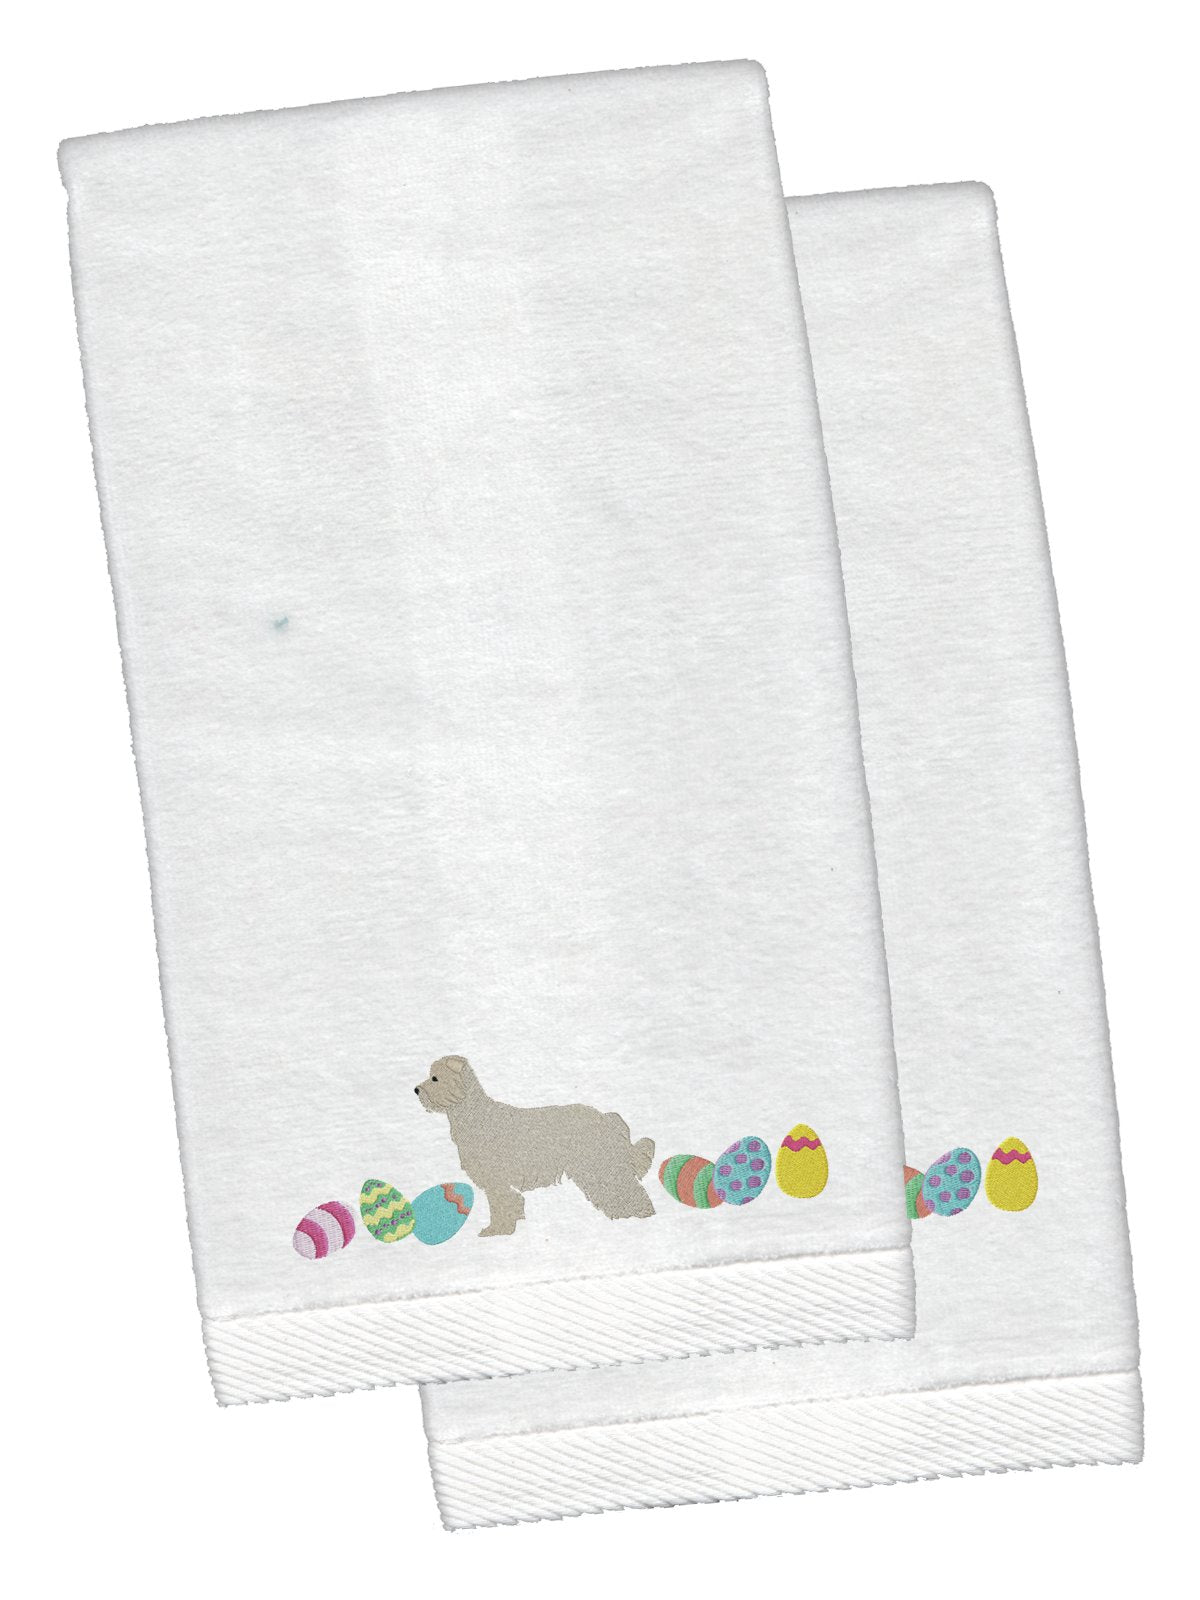 Great Pyrenees Easter White Embroidered Plush Hand Towel Set of 2 CK1650KTEMB by Caroline's Treasures